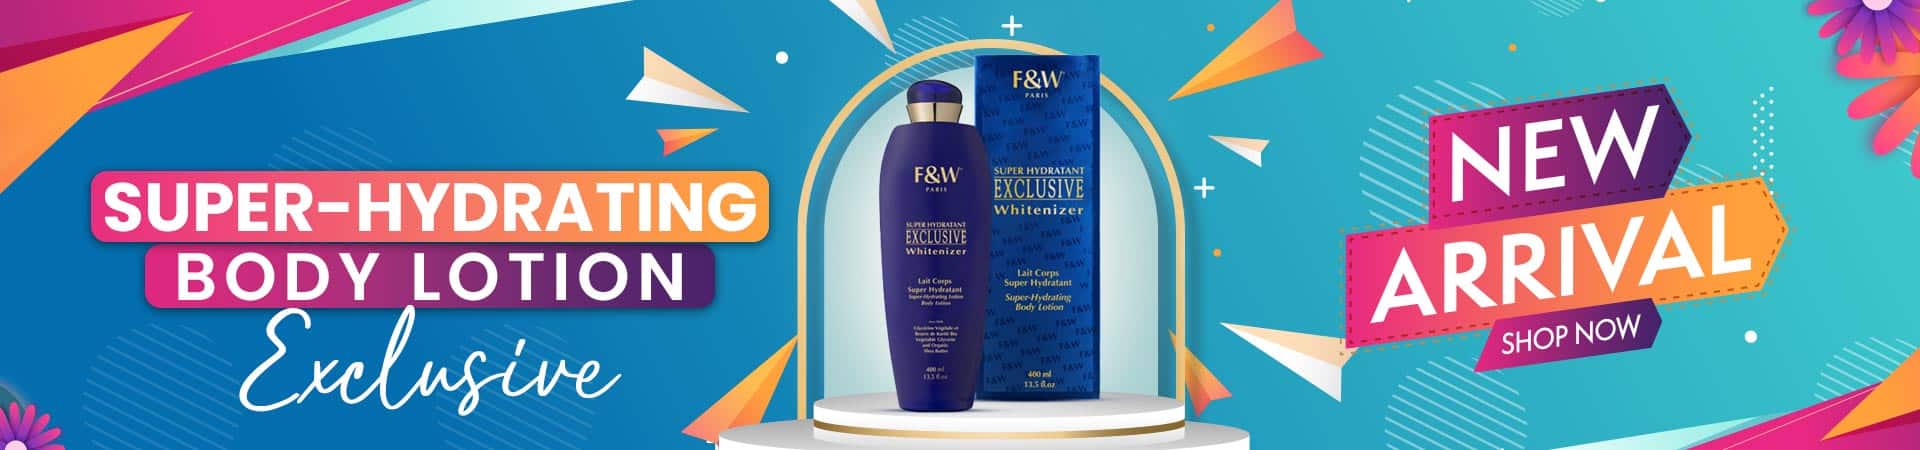 Exclusive Super Hydrating Body Lotion